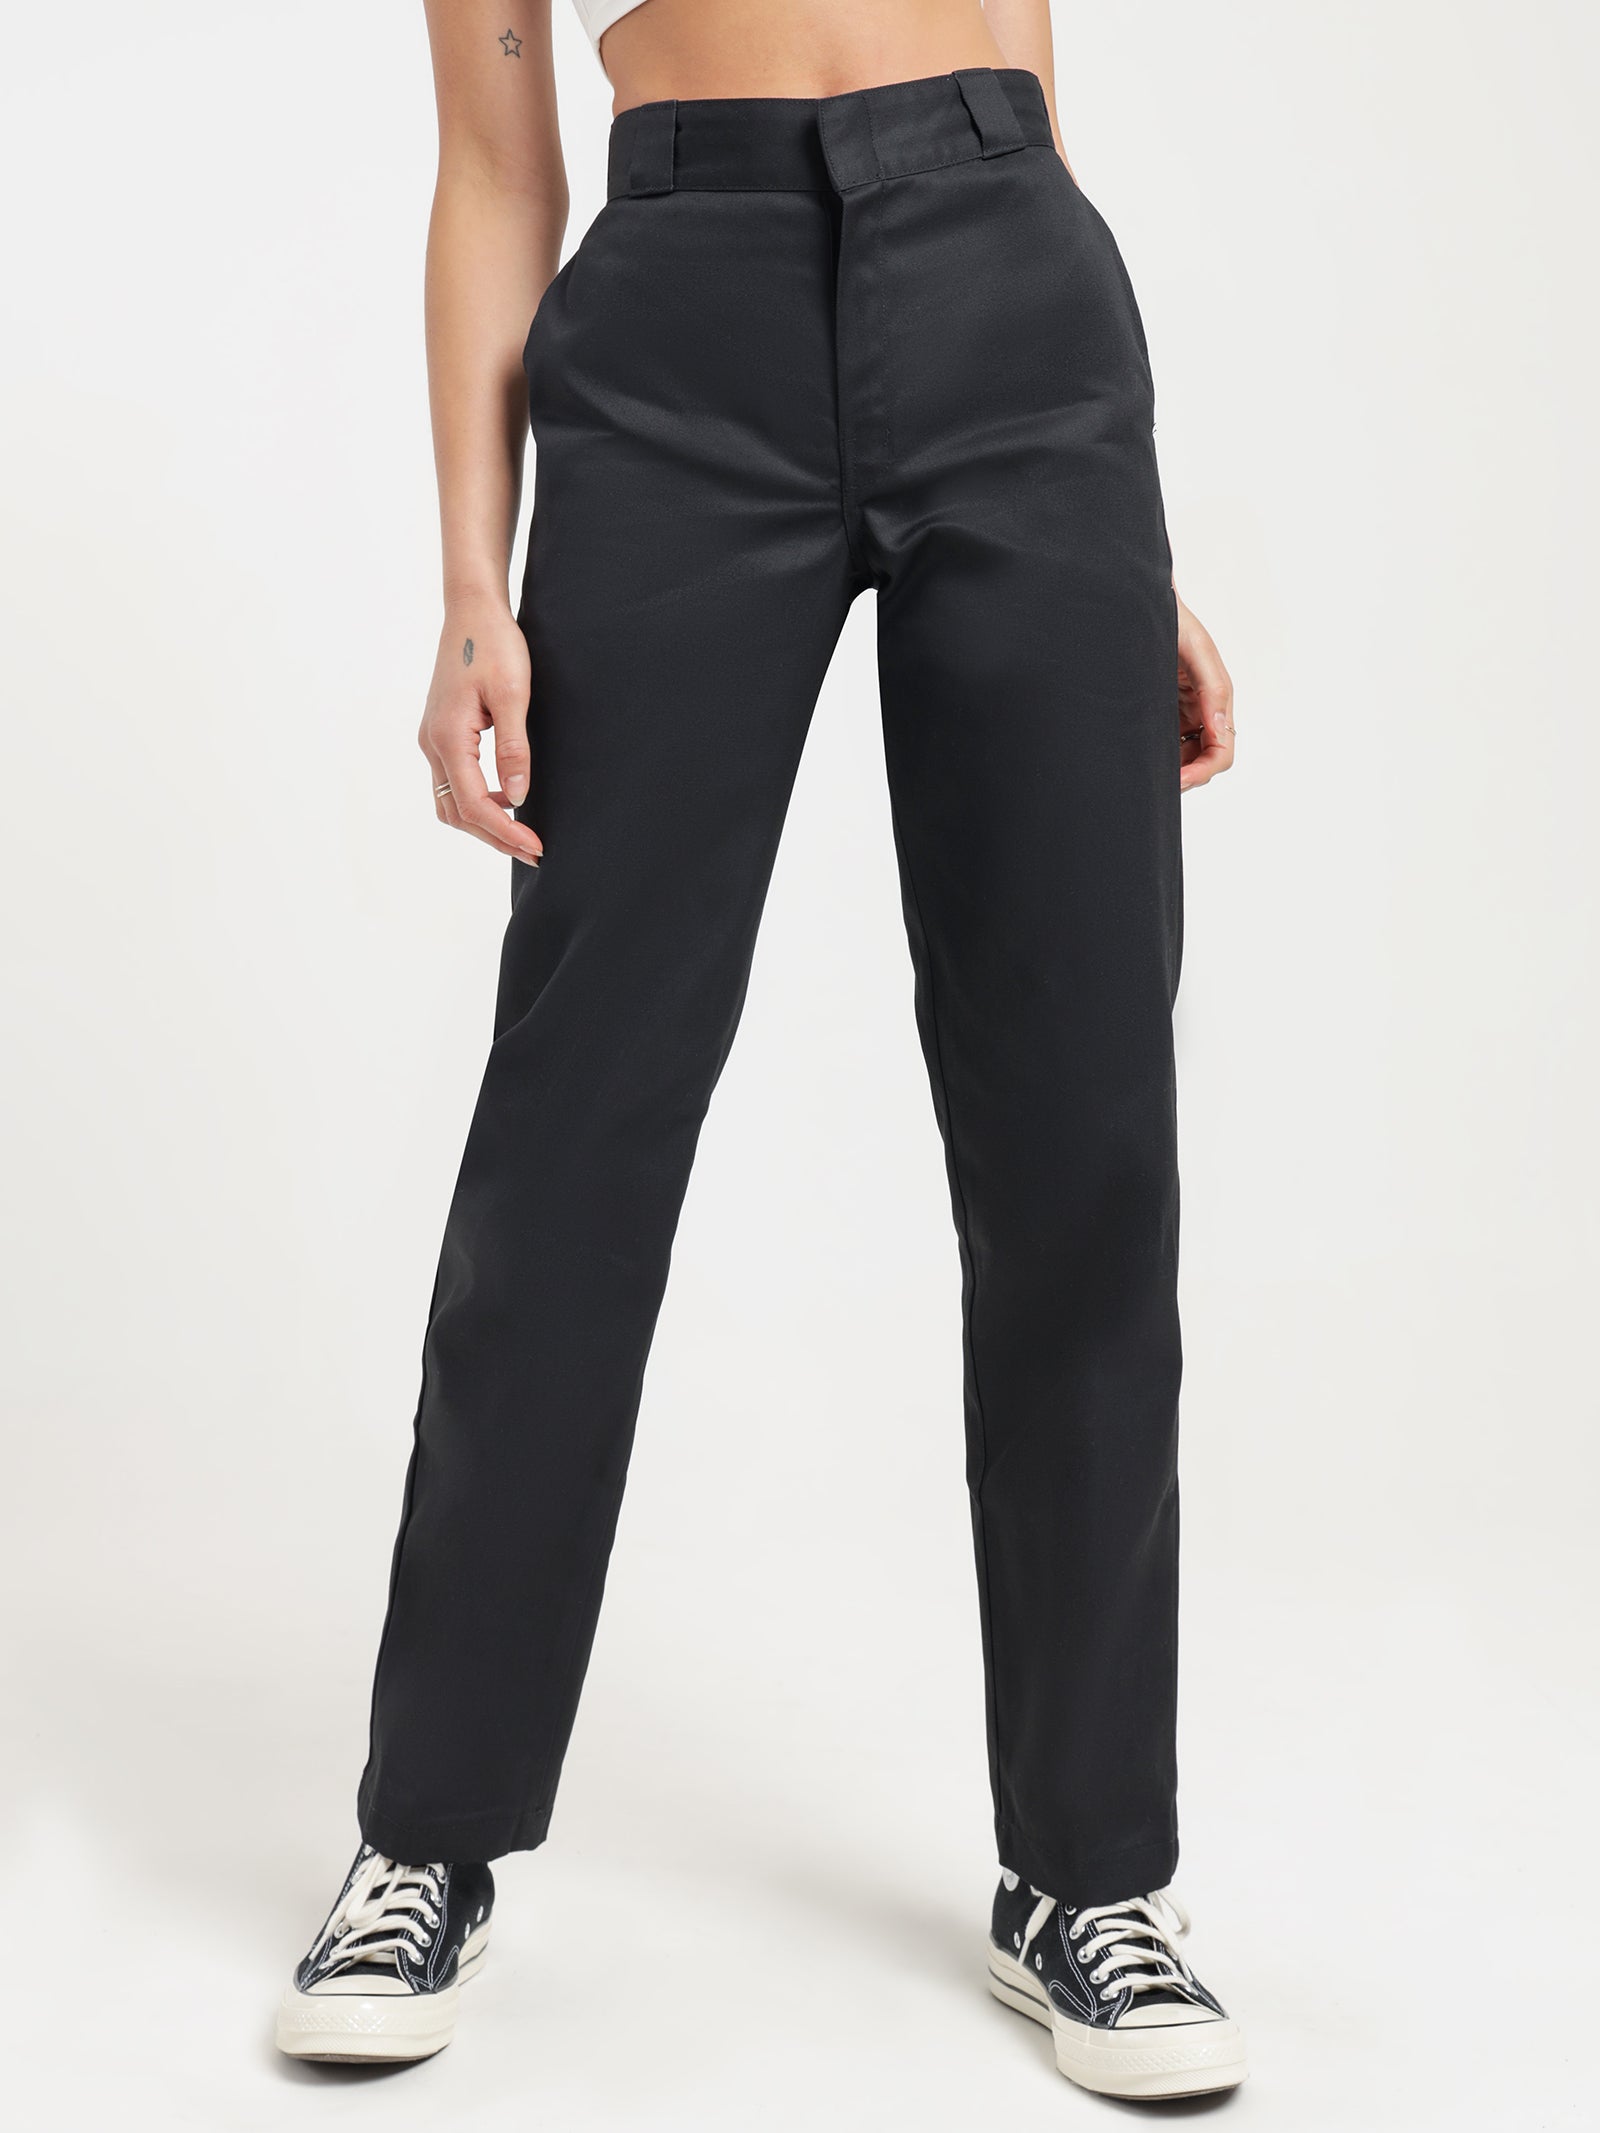 875 Tapered Fit Pants in Black - Glue Store